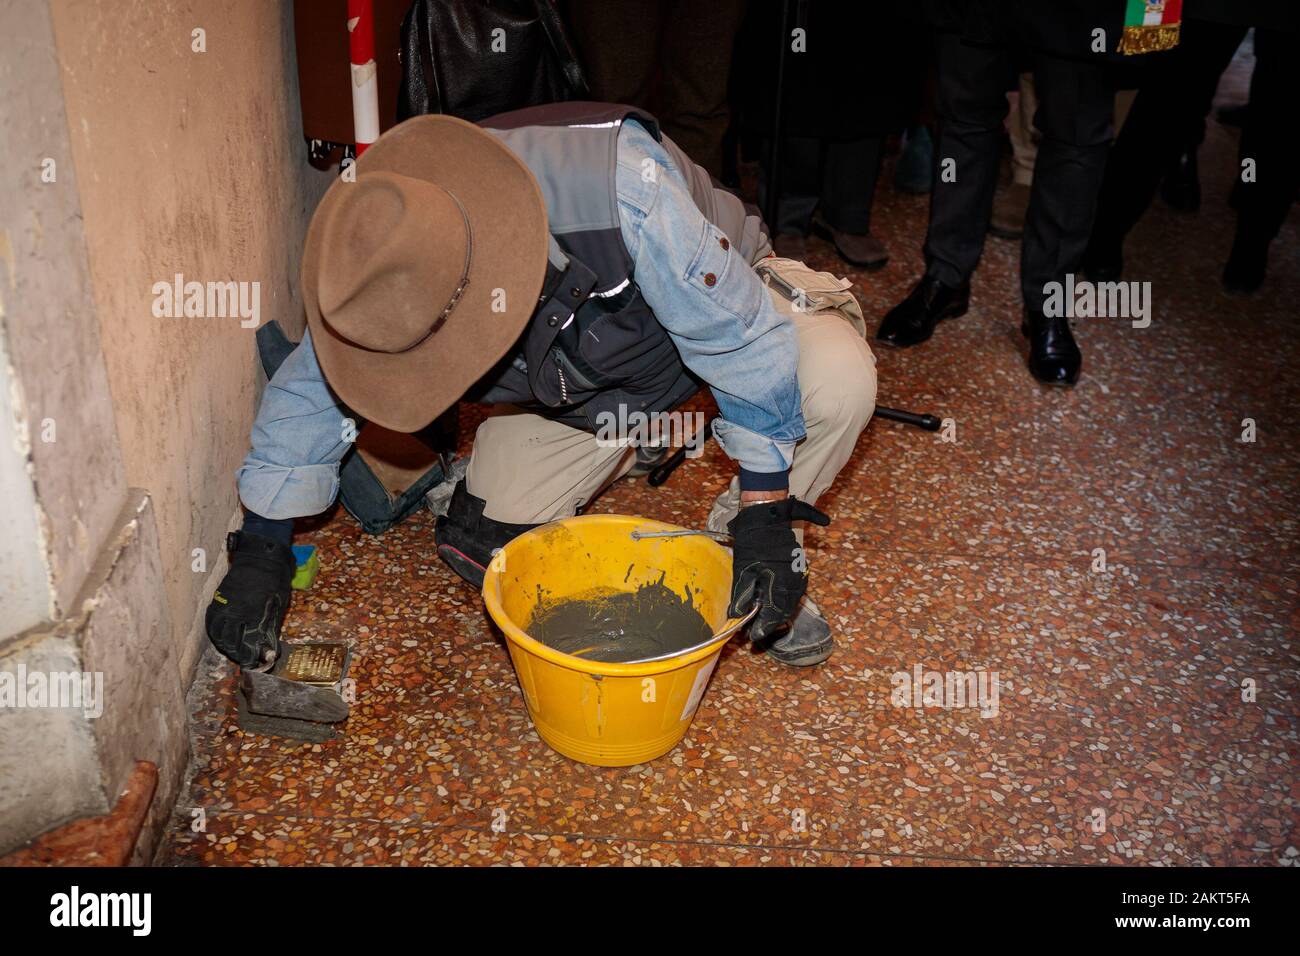 Bologna, Italy. 10th January, 2020. The German artist Gunter Demnig placing some stolpersteinen stumbling blocks in a few points of the city to remember the Jewish victims of the Nazism Holocaust on January 10, 2020 in Bologna, Italy. Credit: Massimiliano Donati/Alamy Live News Stock Photo